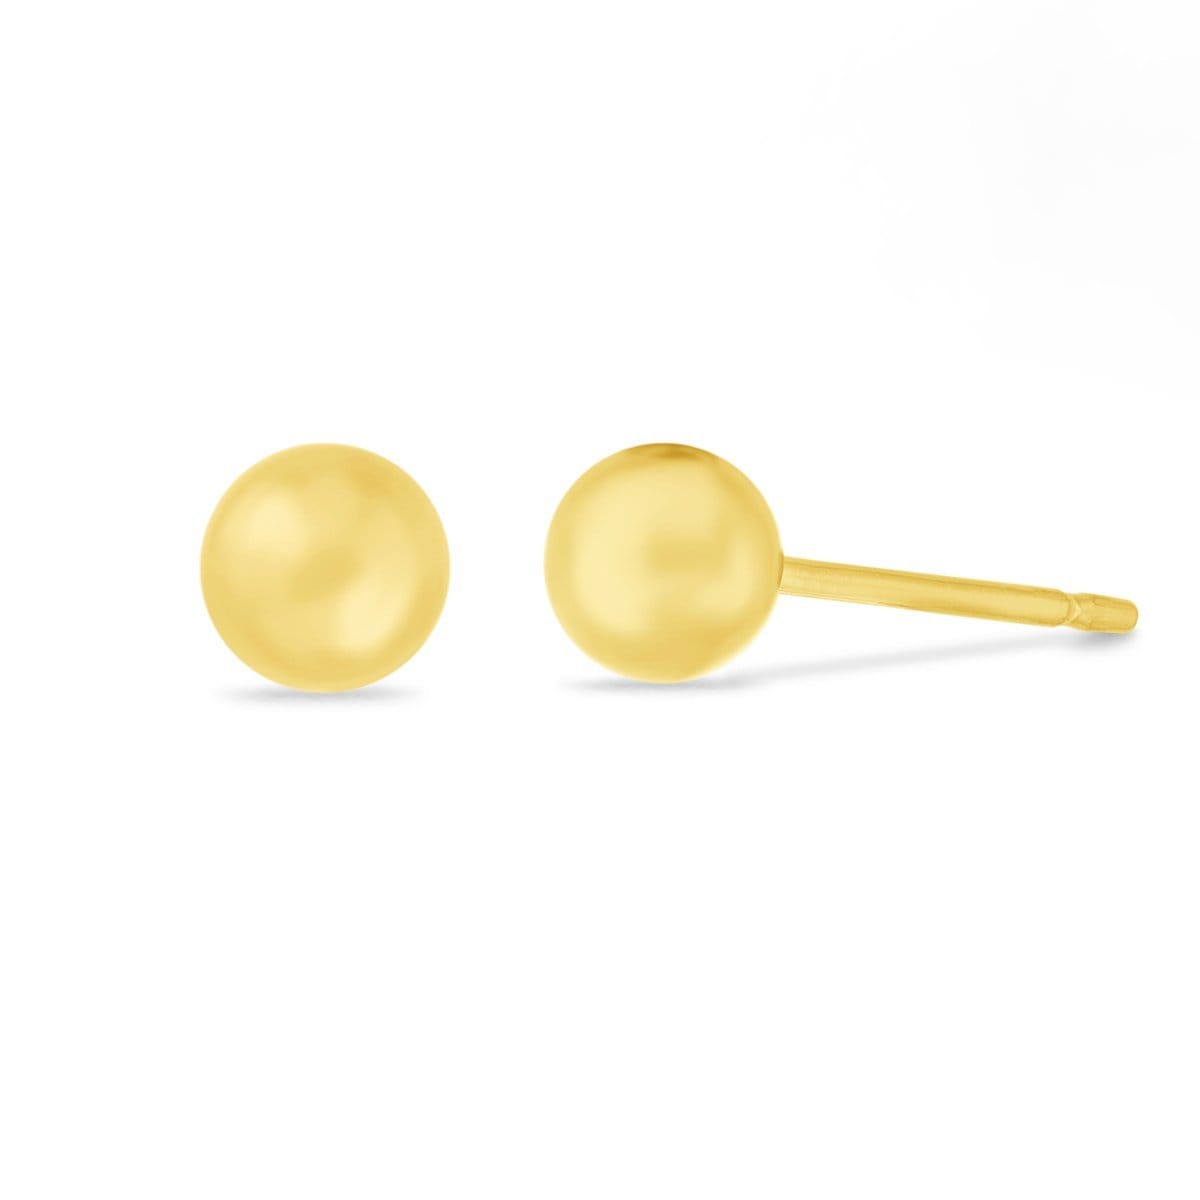 Boma Jewelry Earrings 14K Gold Vermeil Large Ball Studs